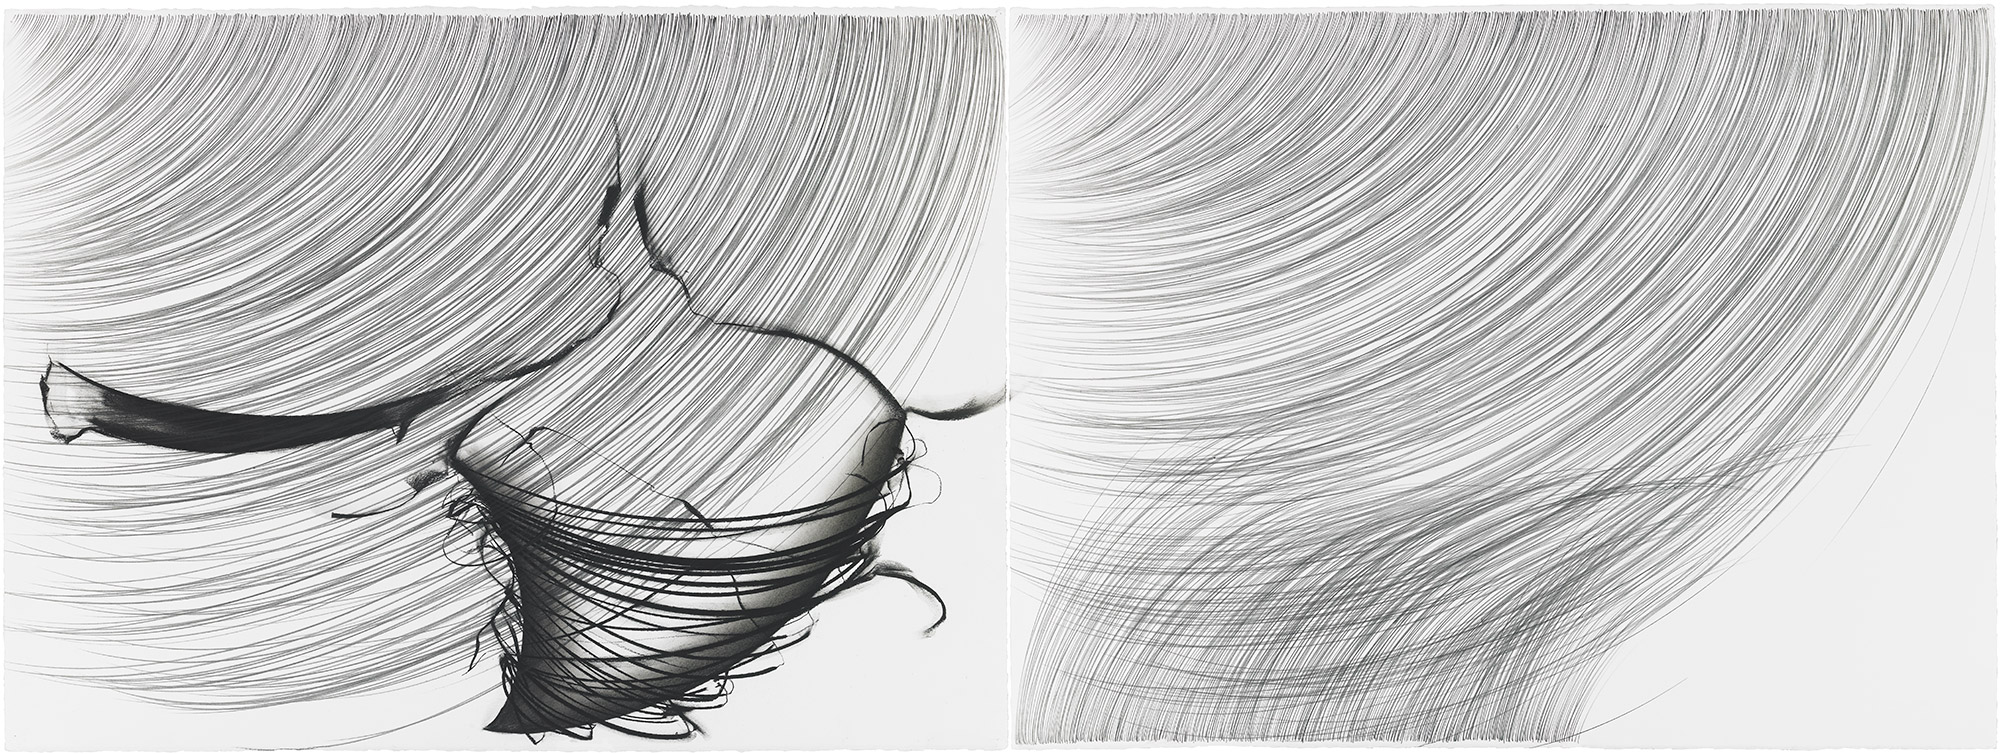 Bone Springs Rain Grass   graphite and pastel pigment on cotton paper, diptych, 22 ¼ x 60 inches, 2005